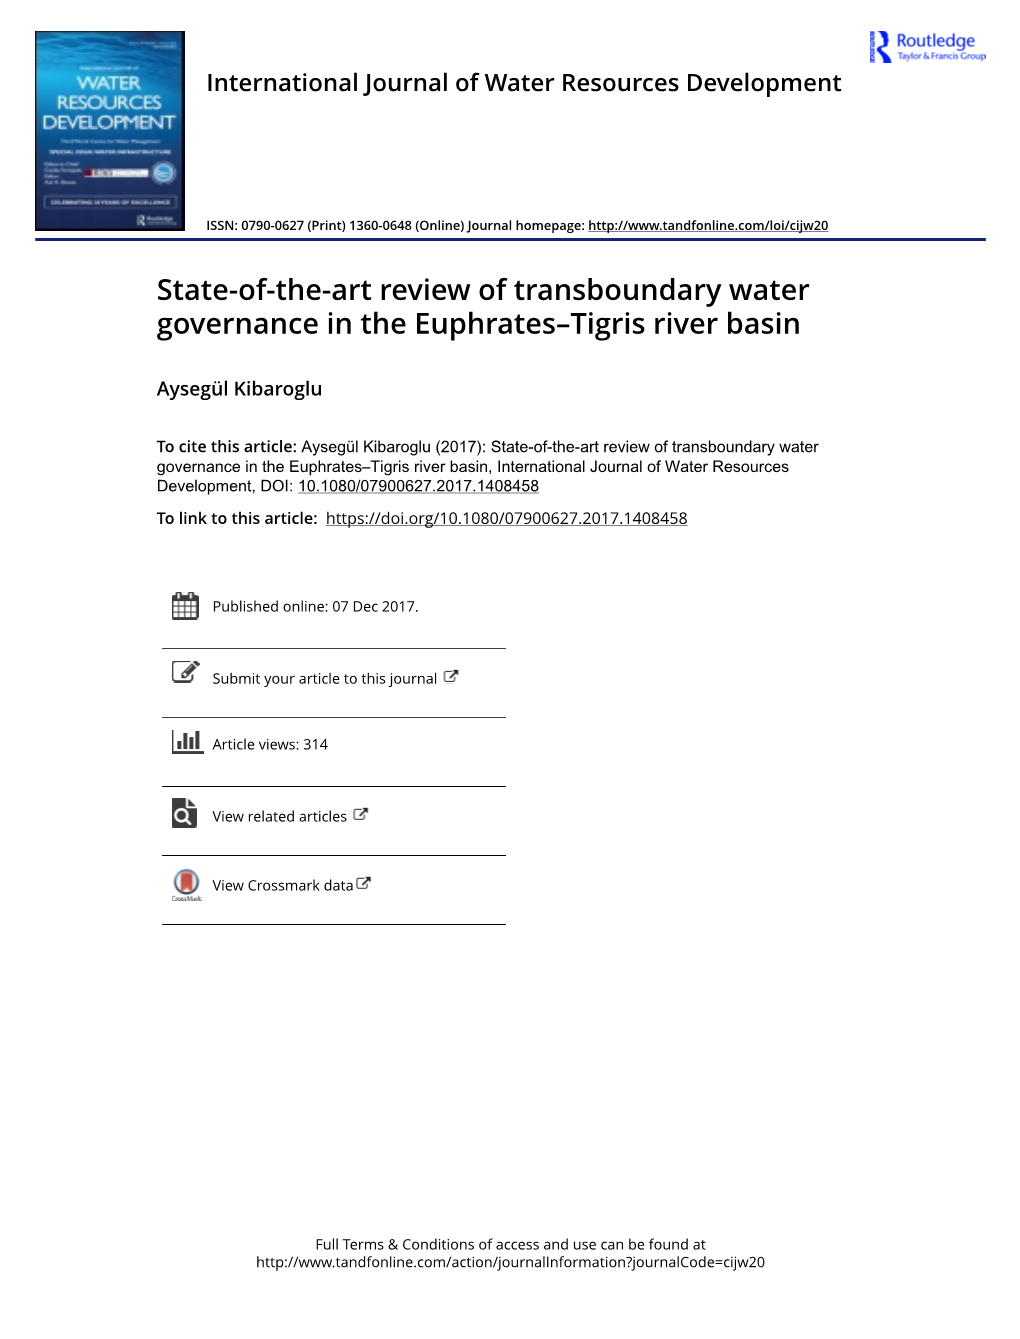 State-Of-The-Art Review of Transboundary Water Governance in the Euphrates–Tigris River Basin